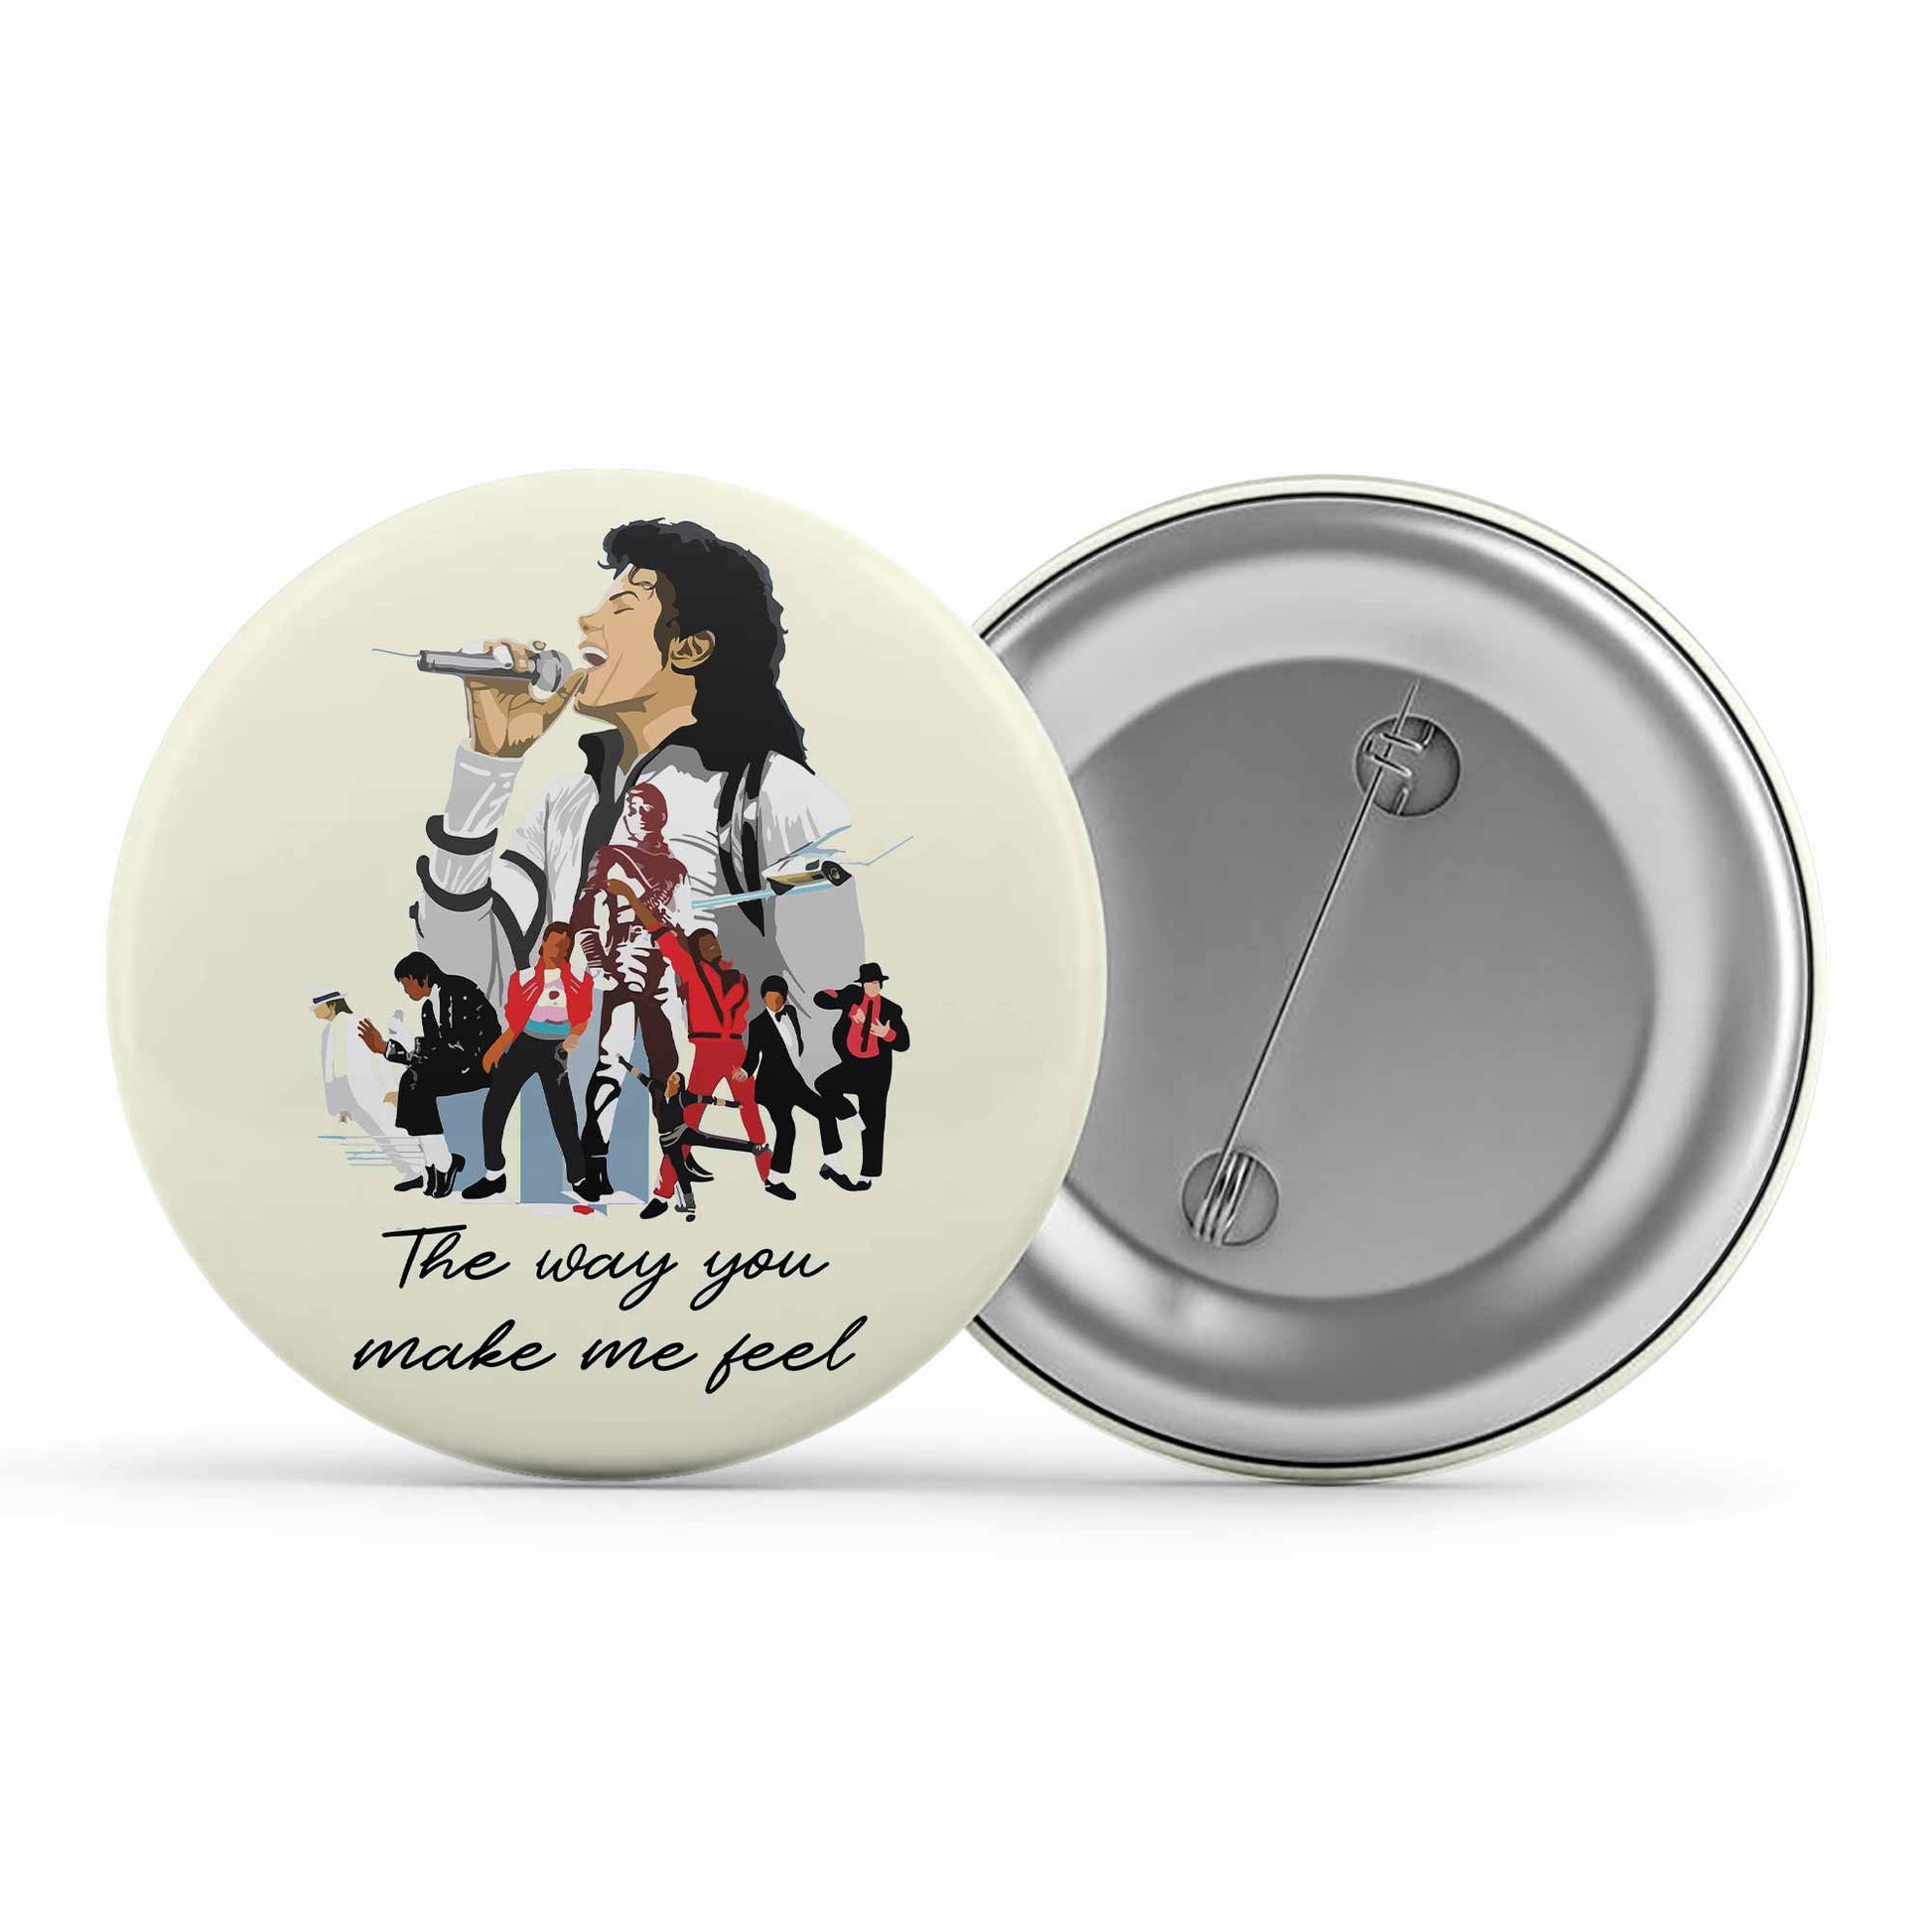 michael jackson the way you make me feel badge pin button music band buy online united states of america usa the banyan tee tbt men women girls boys unisex